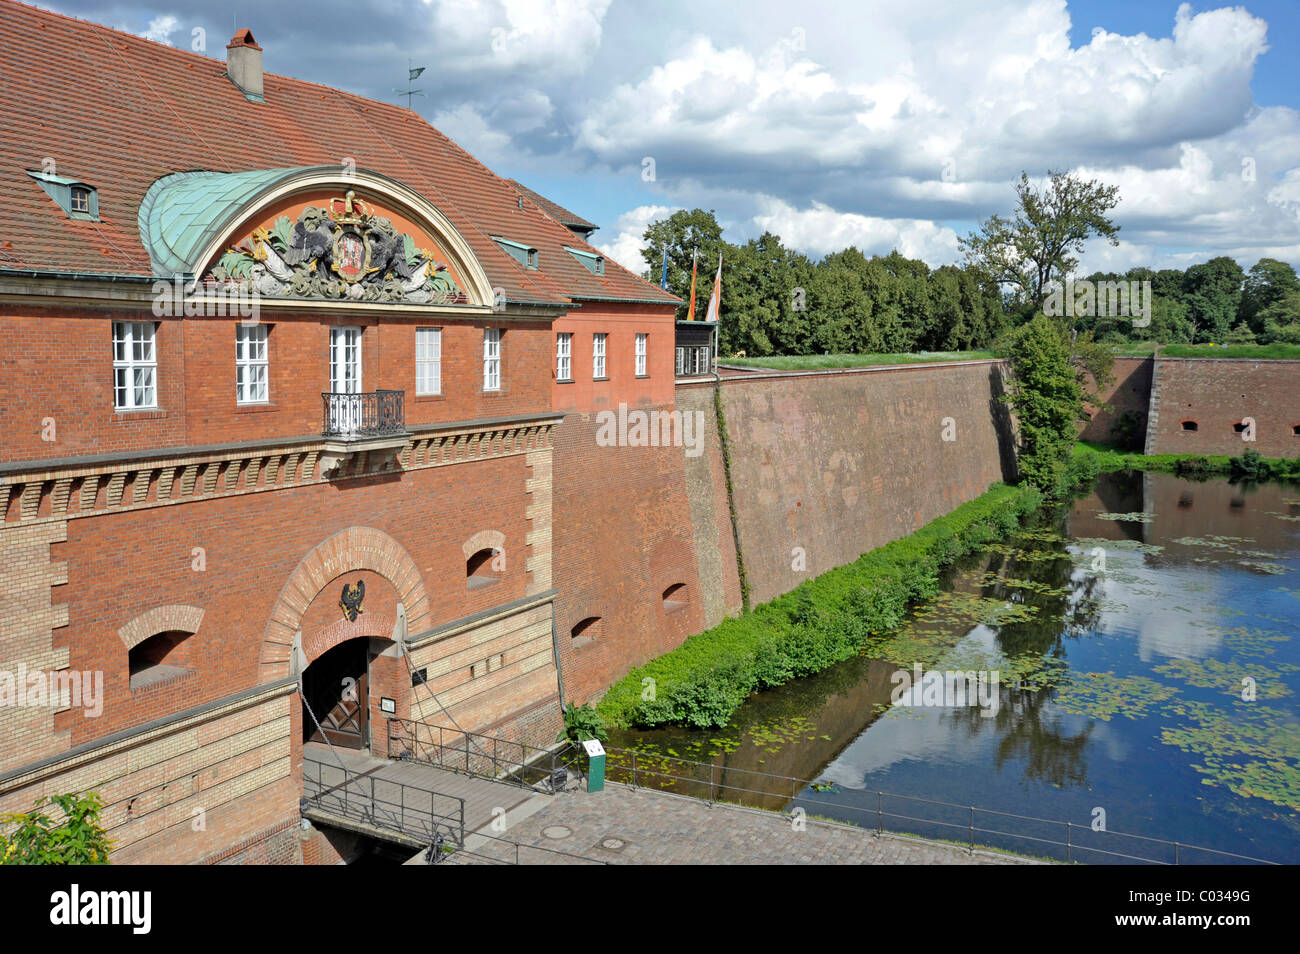 Commandant's House, Queen's Bastion, with moats, Spandau Citadel fortress, Berlin, Germany, Europe Stock Photo